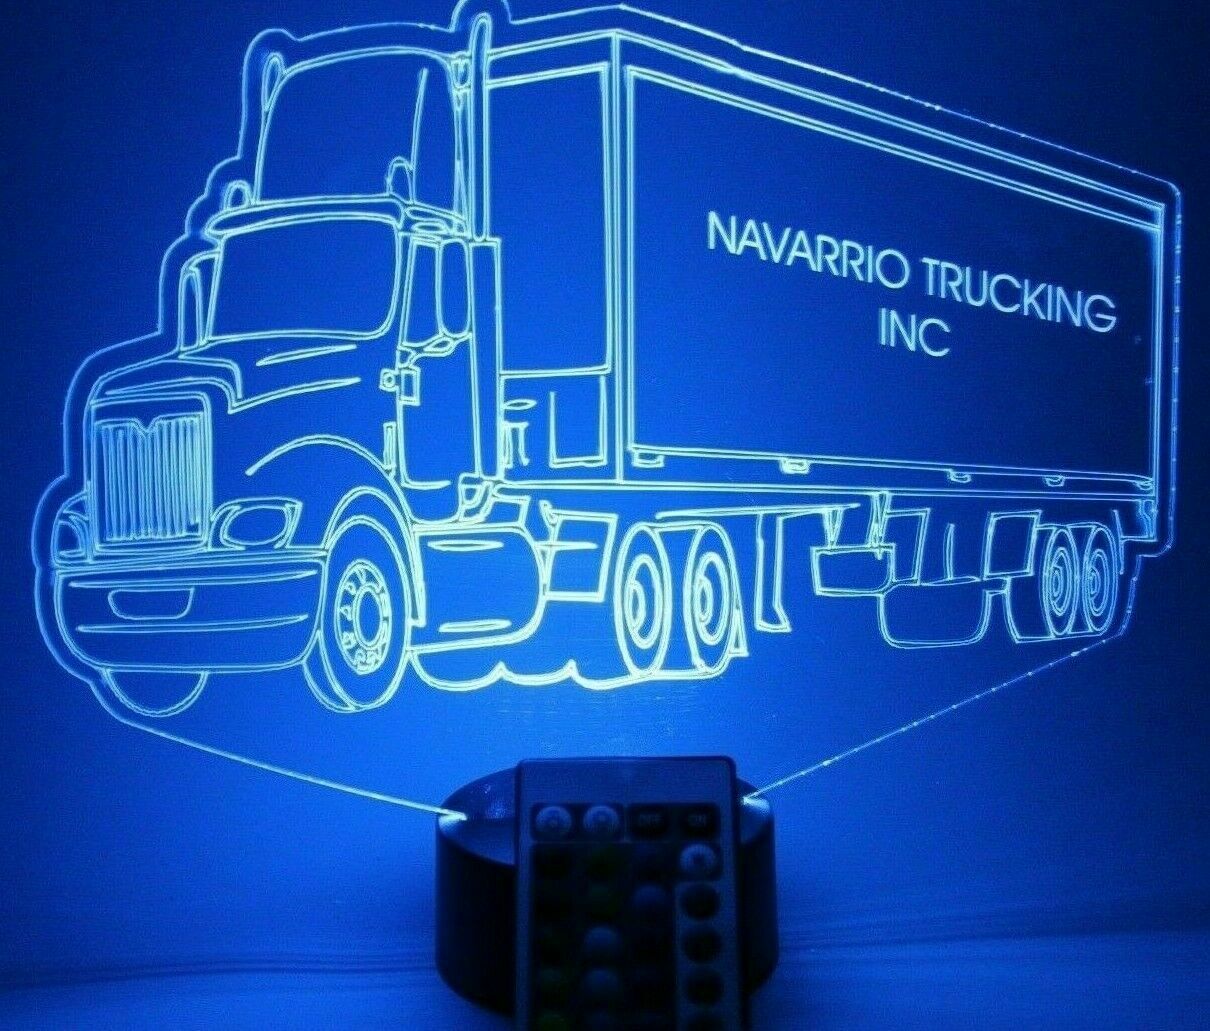 Tractor Trailer LED Tabletop Night Light Up Lamp, 16 Color options with Remote